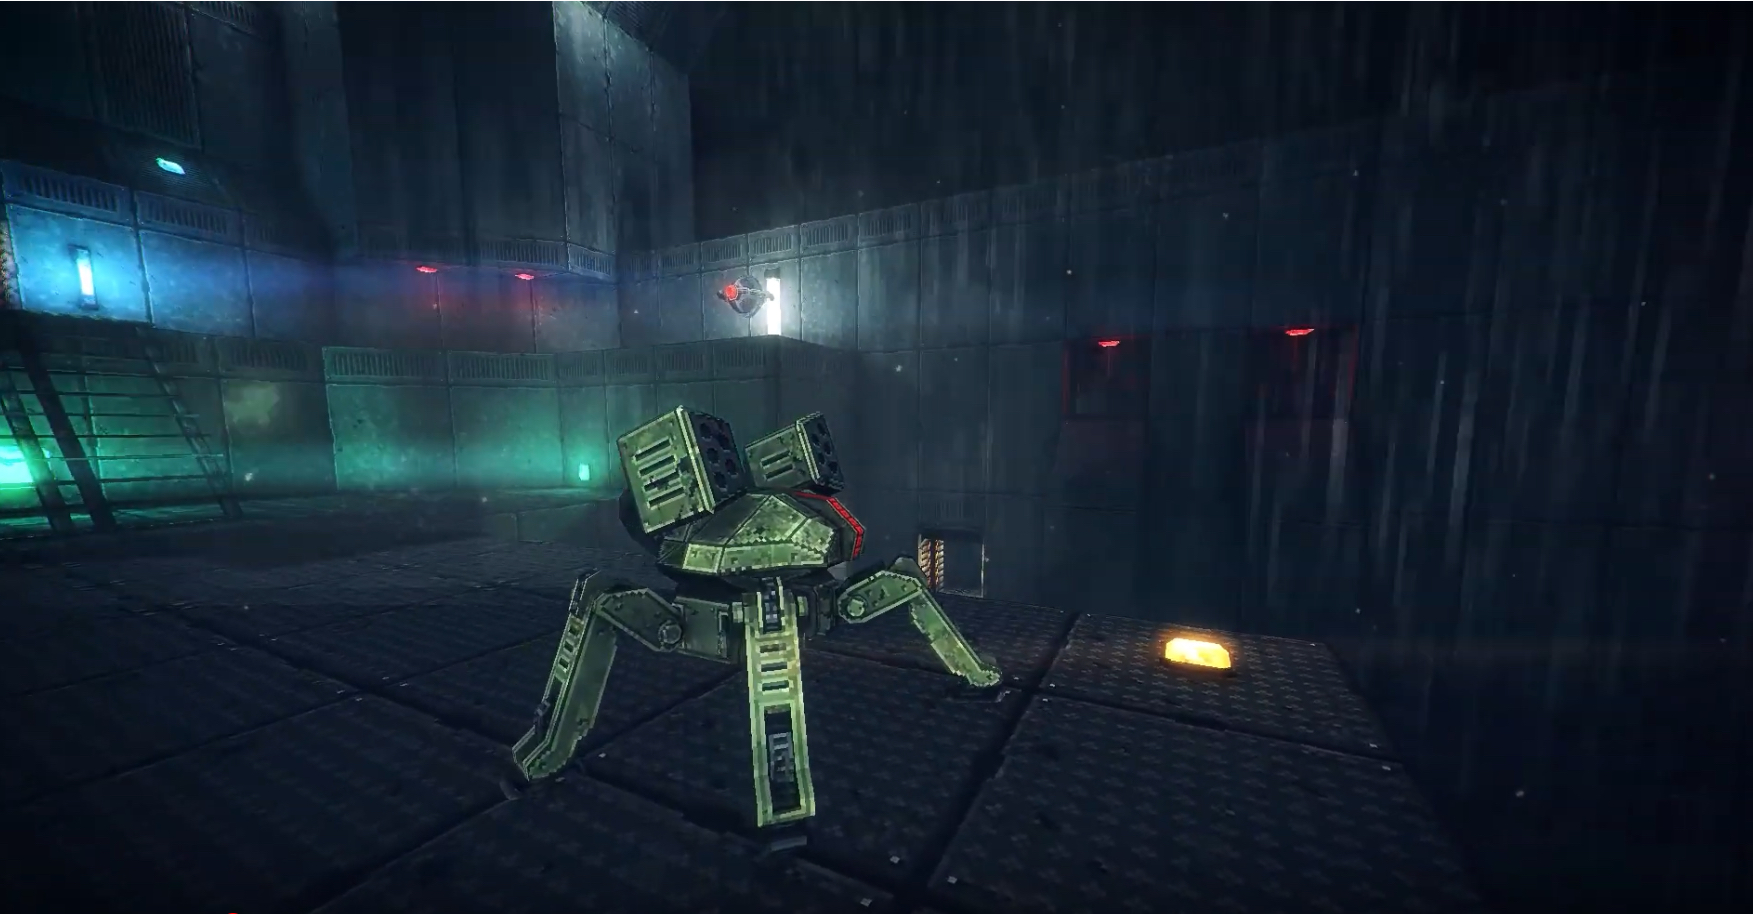 The Retro-Shooter Core Decay Just Received An Announcement Trailer